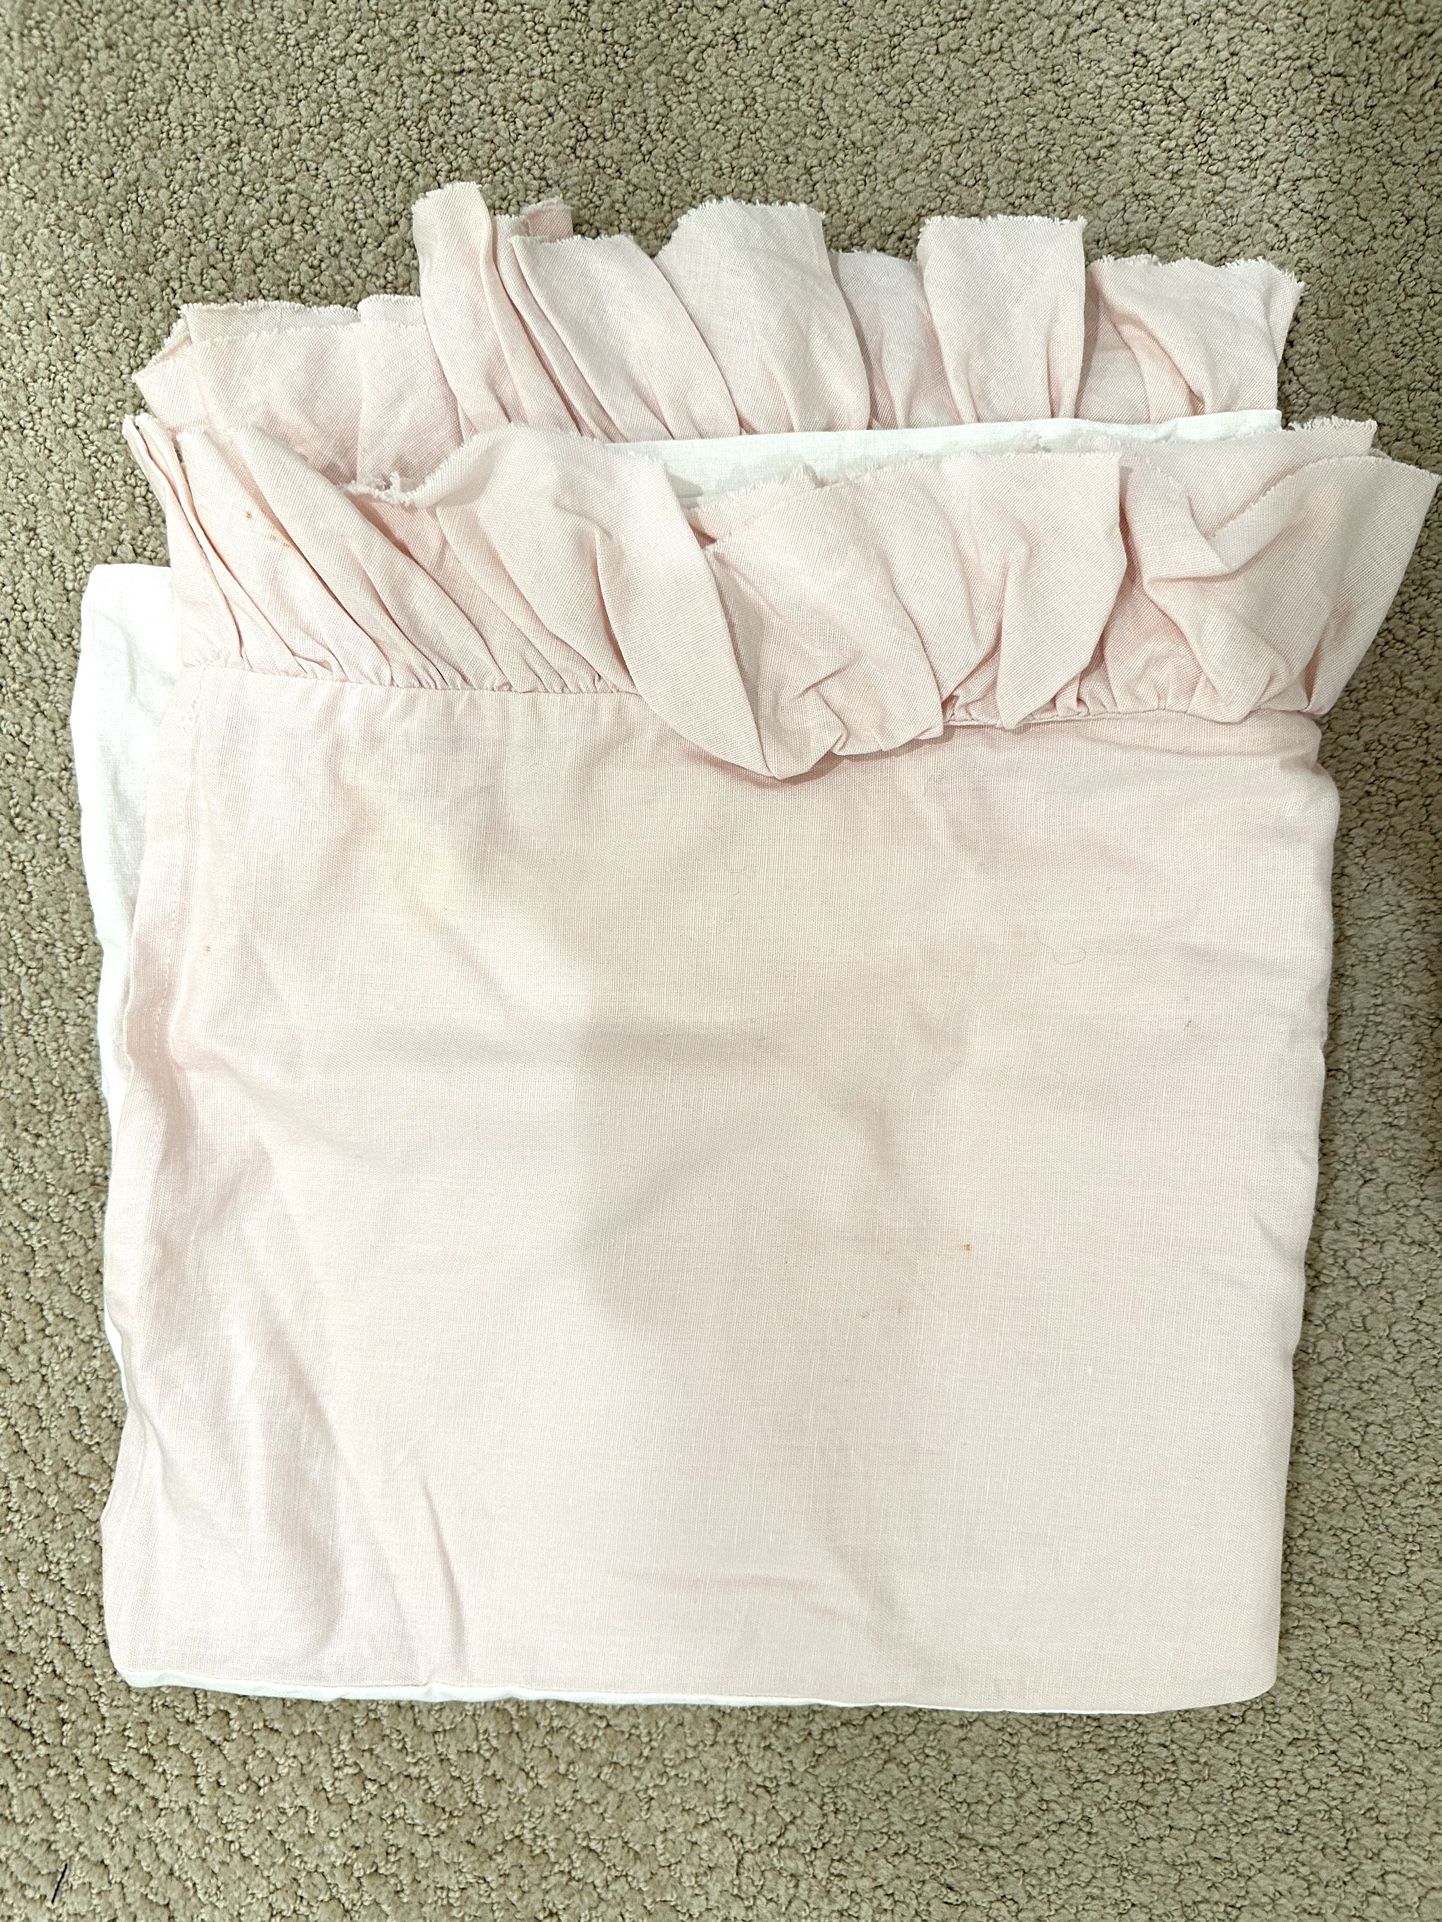 RH Pink/blush Bed Skirt And Changing Table Cover 